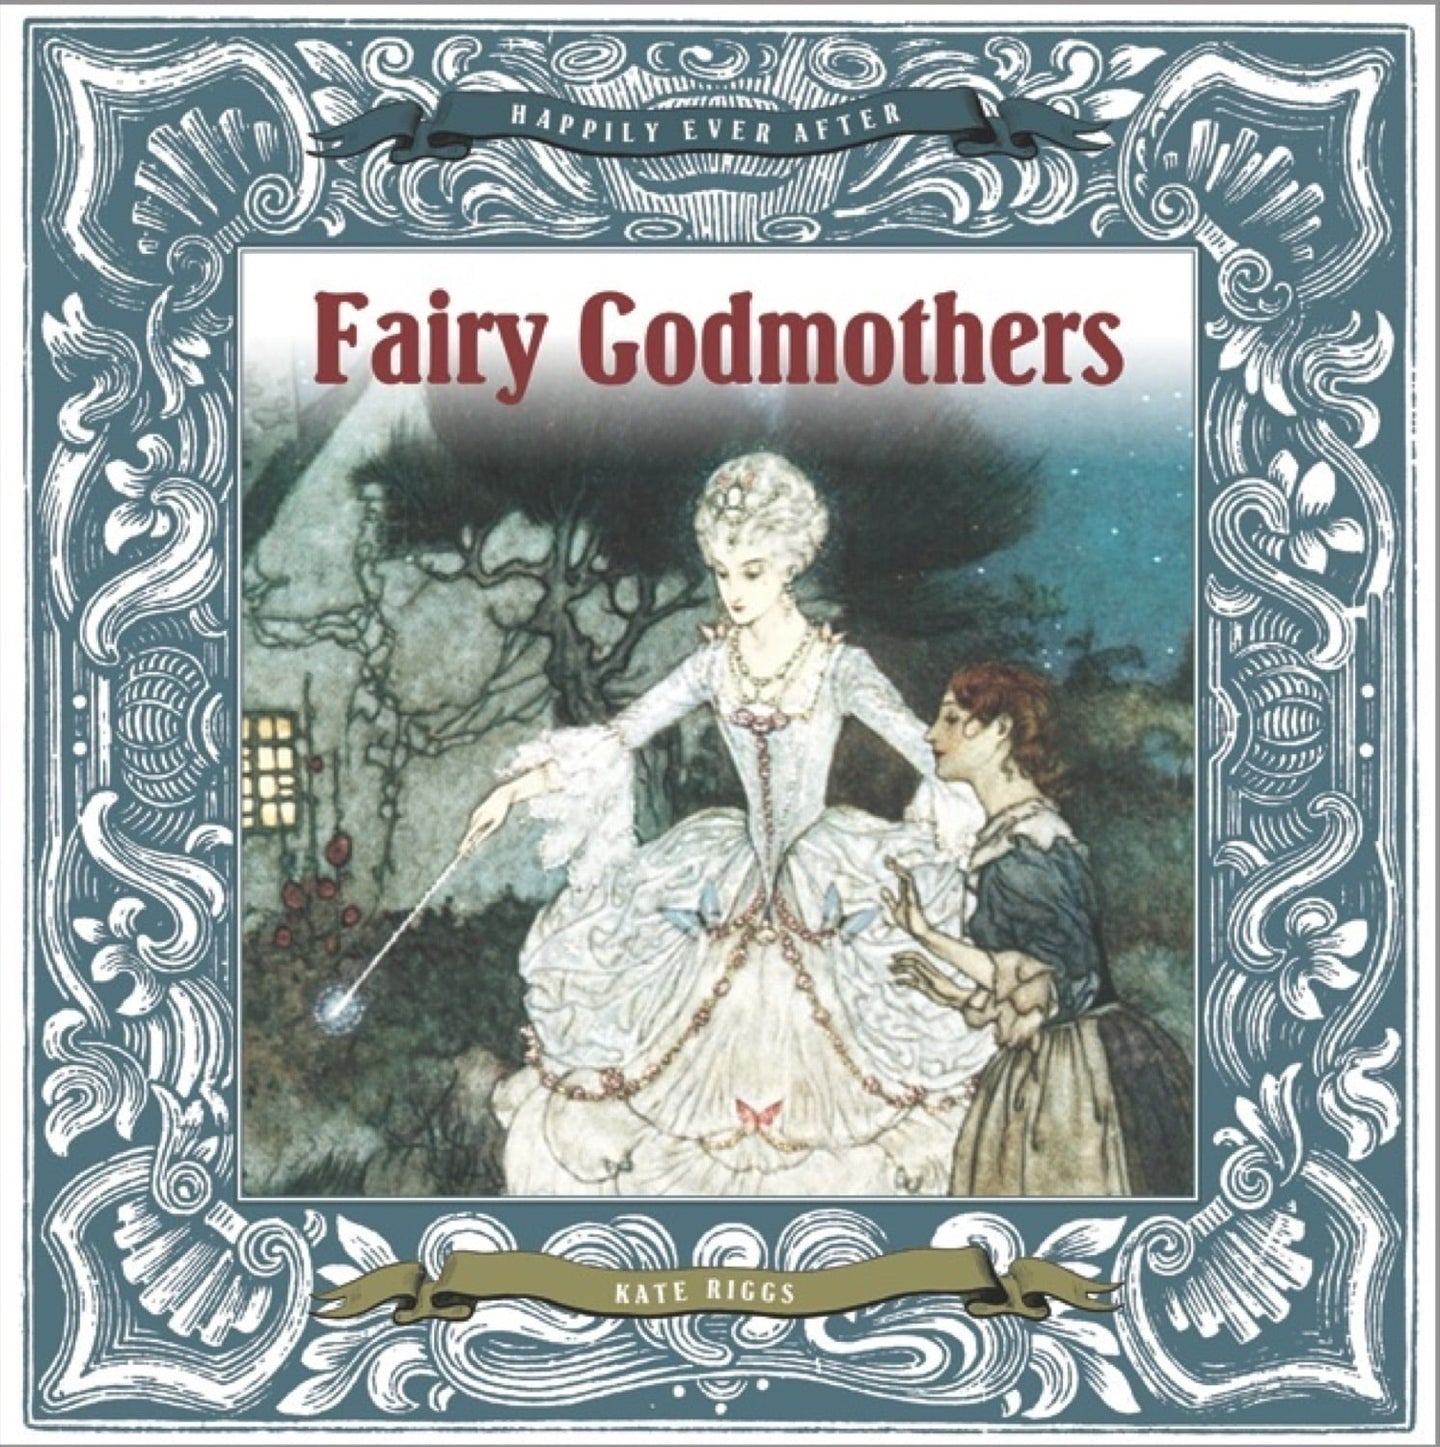 Happily Ever After: Fairy Godmothers